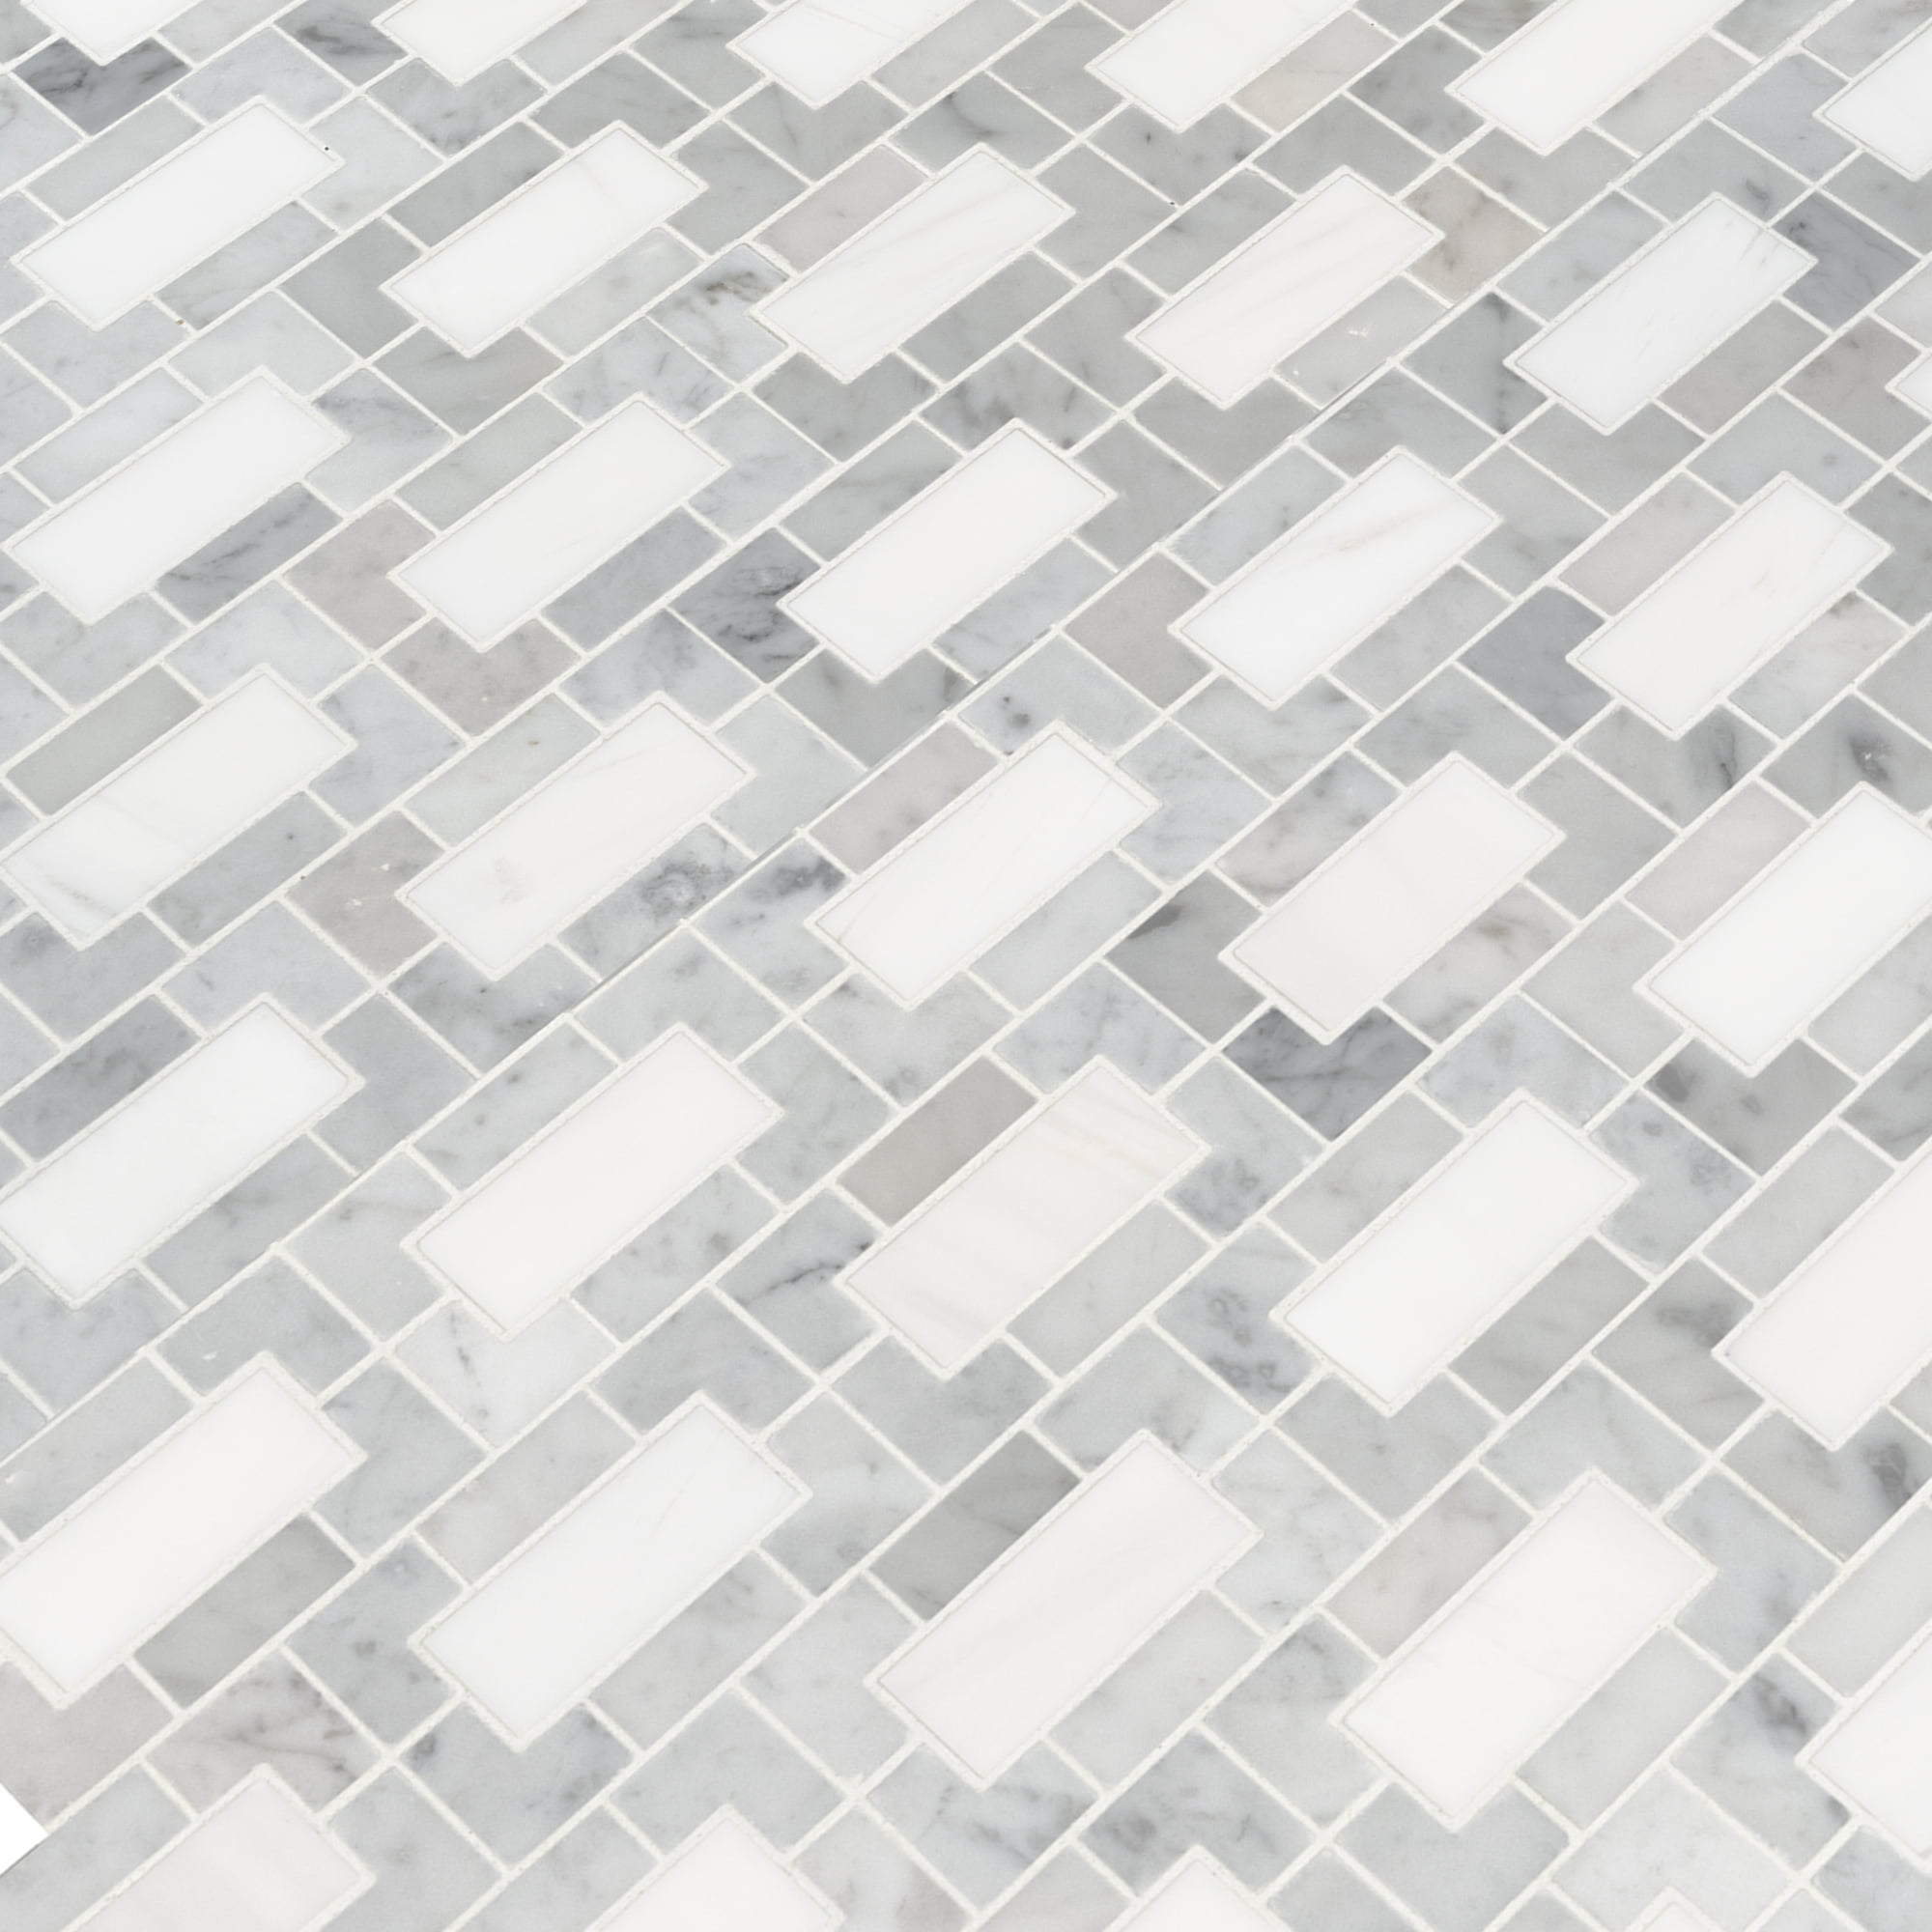 MSI Brixstyle Blanco 12 in. x 12 in. x 10mm Glazed Porcelain Mesh-Mounted Mosaic Tile (6 Sq. ft. / case), Size: 12 x 12